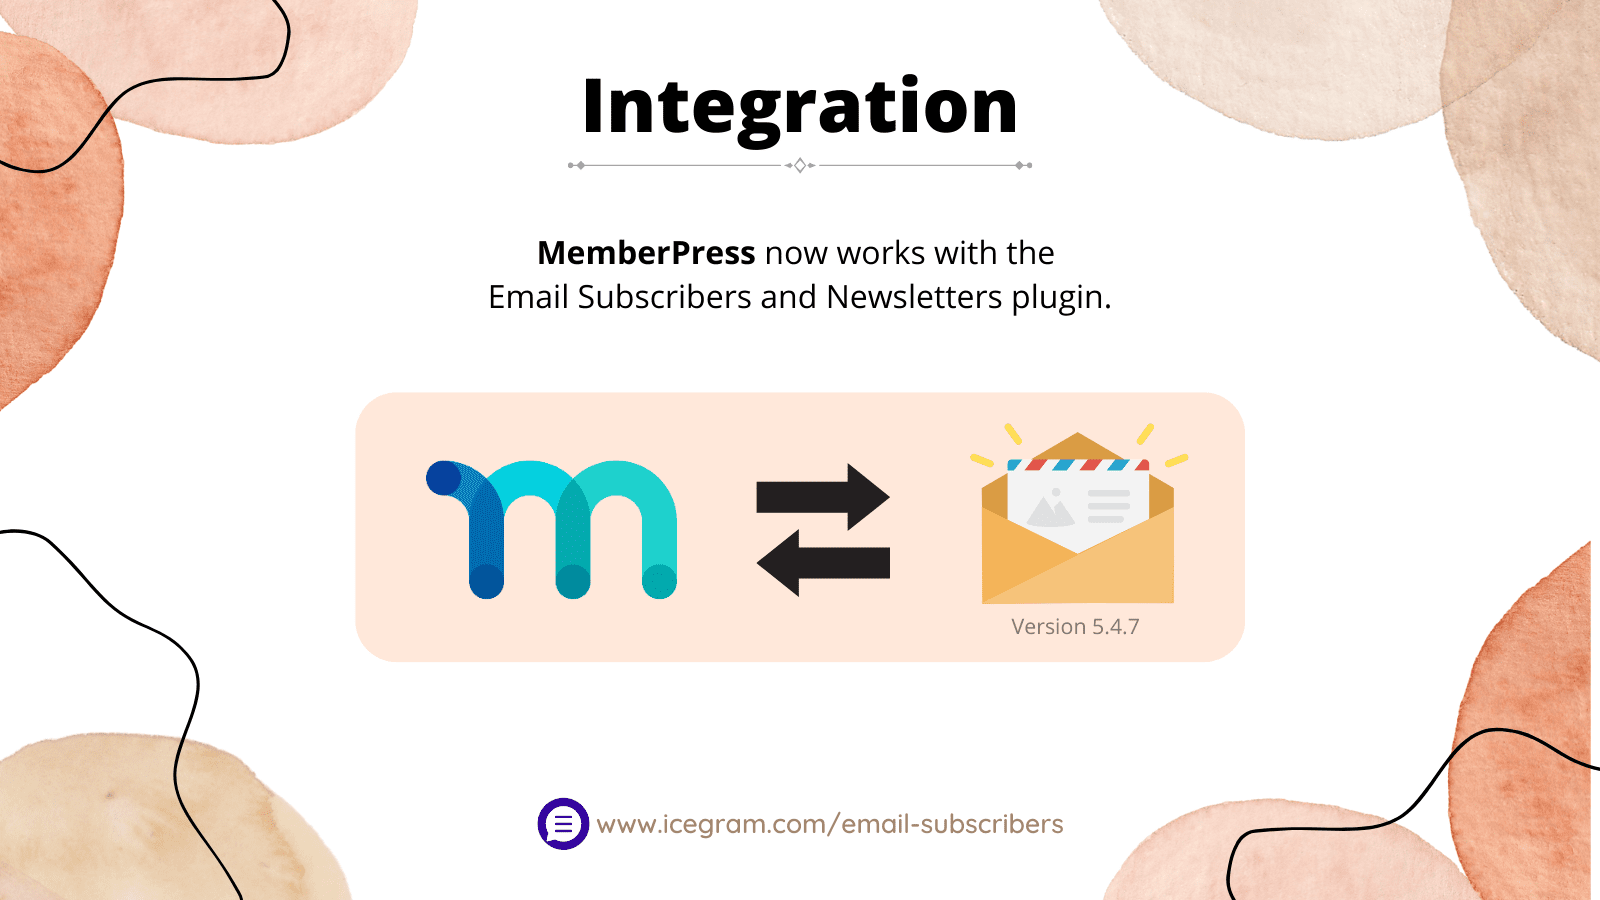 Integration - Email Subscribers and MemberPress